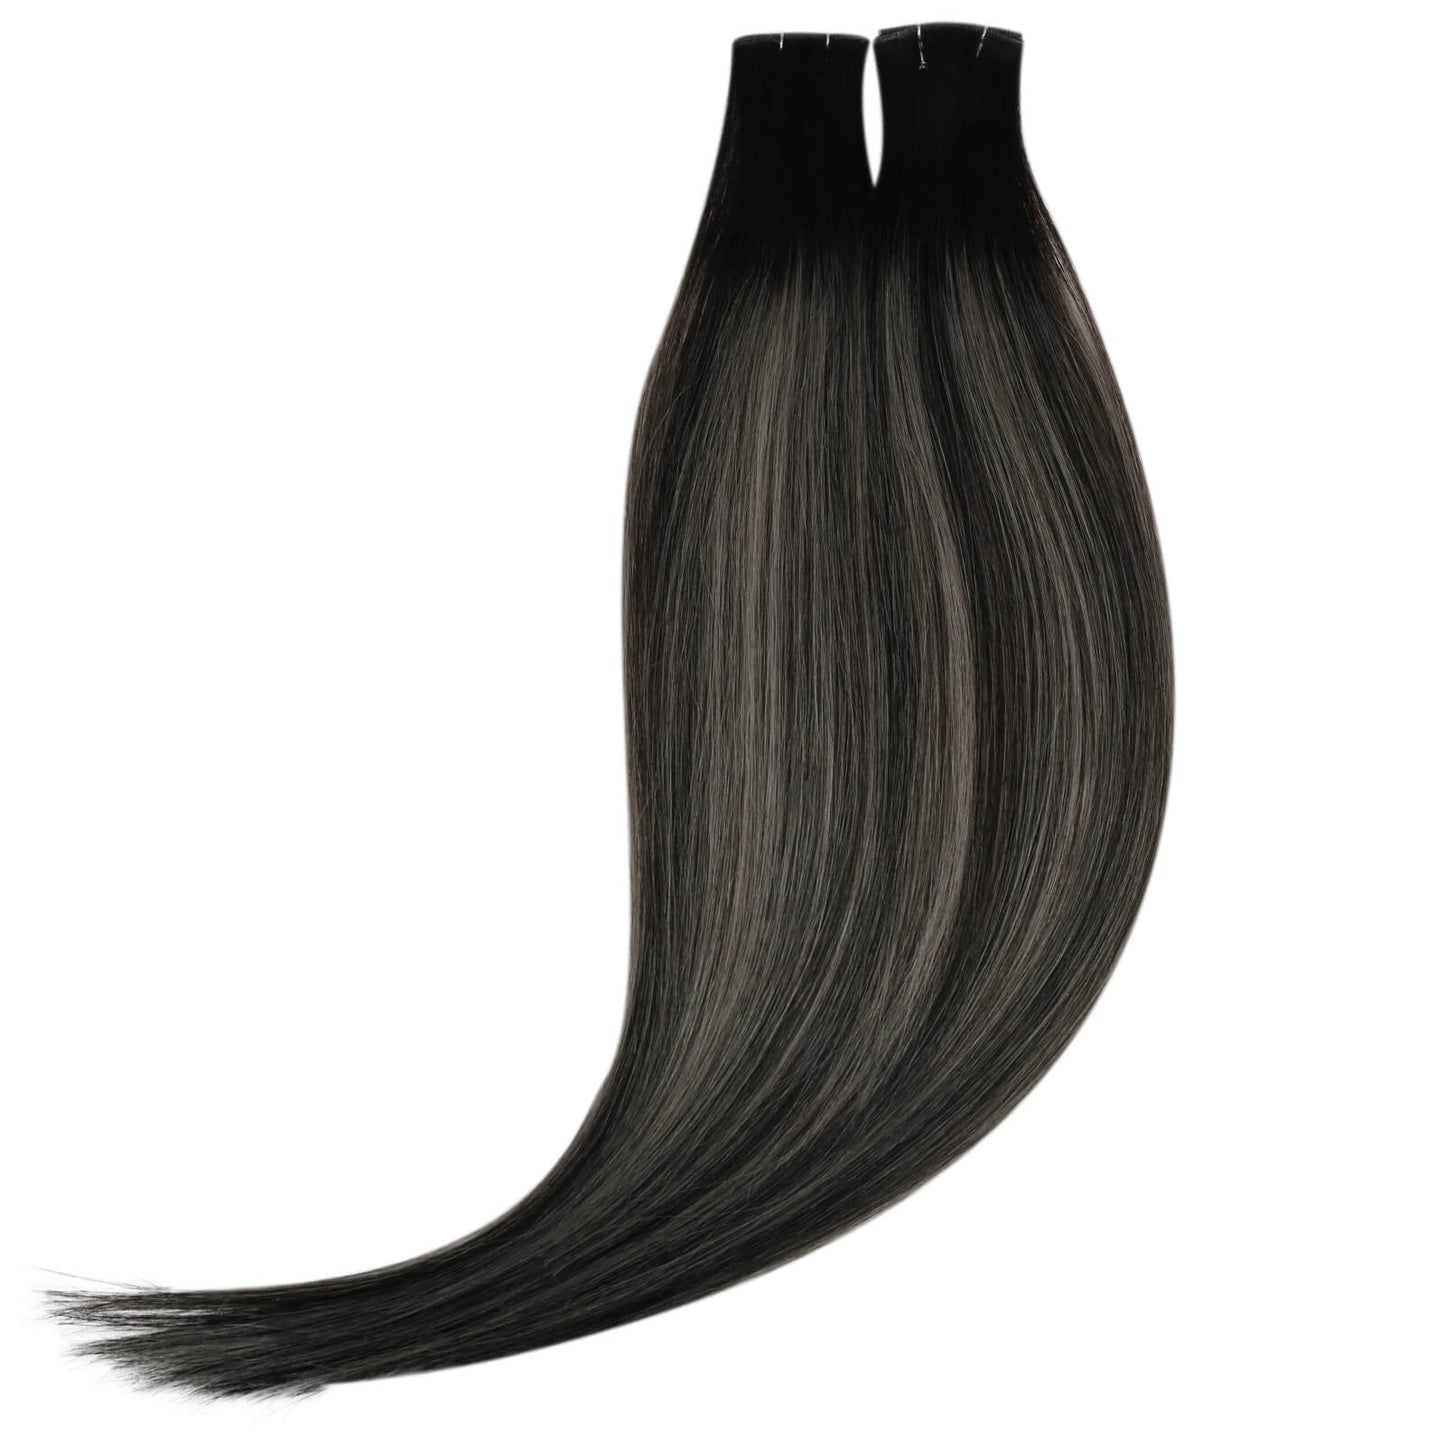 hybrid weft human hair weft extensions wholesale